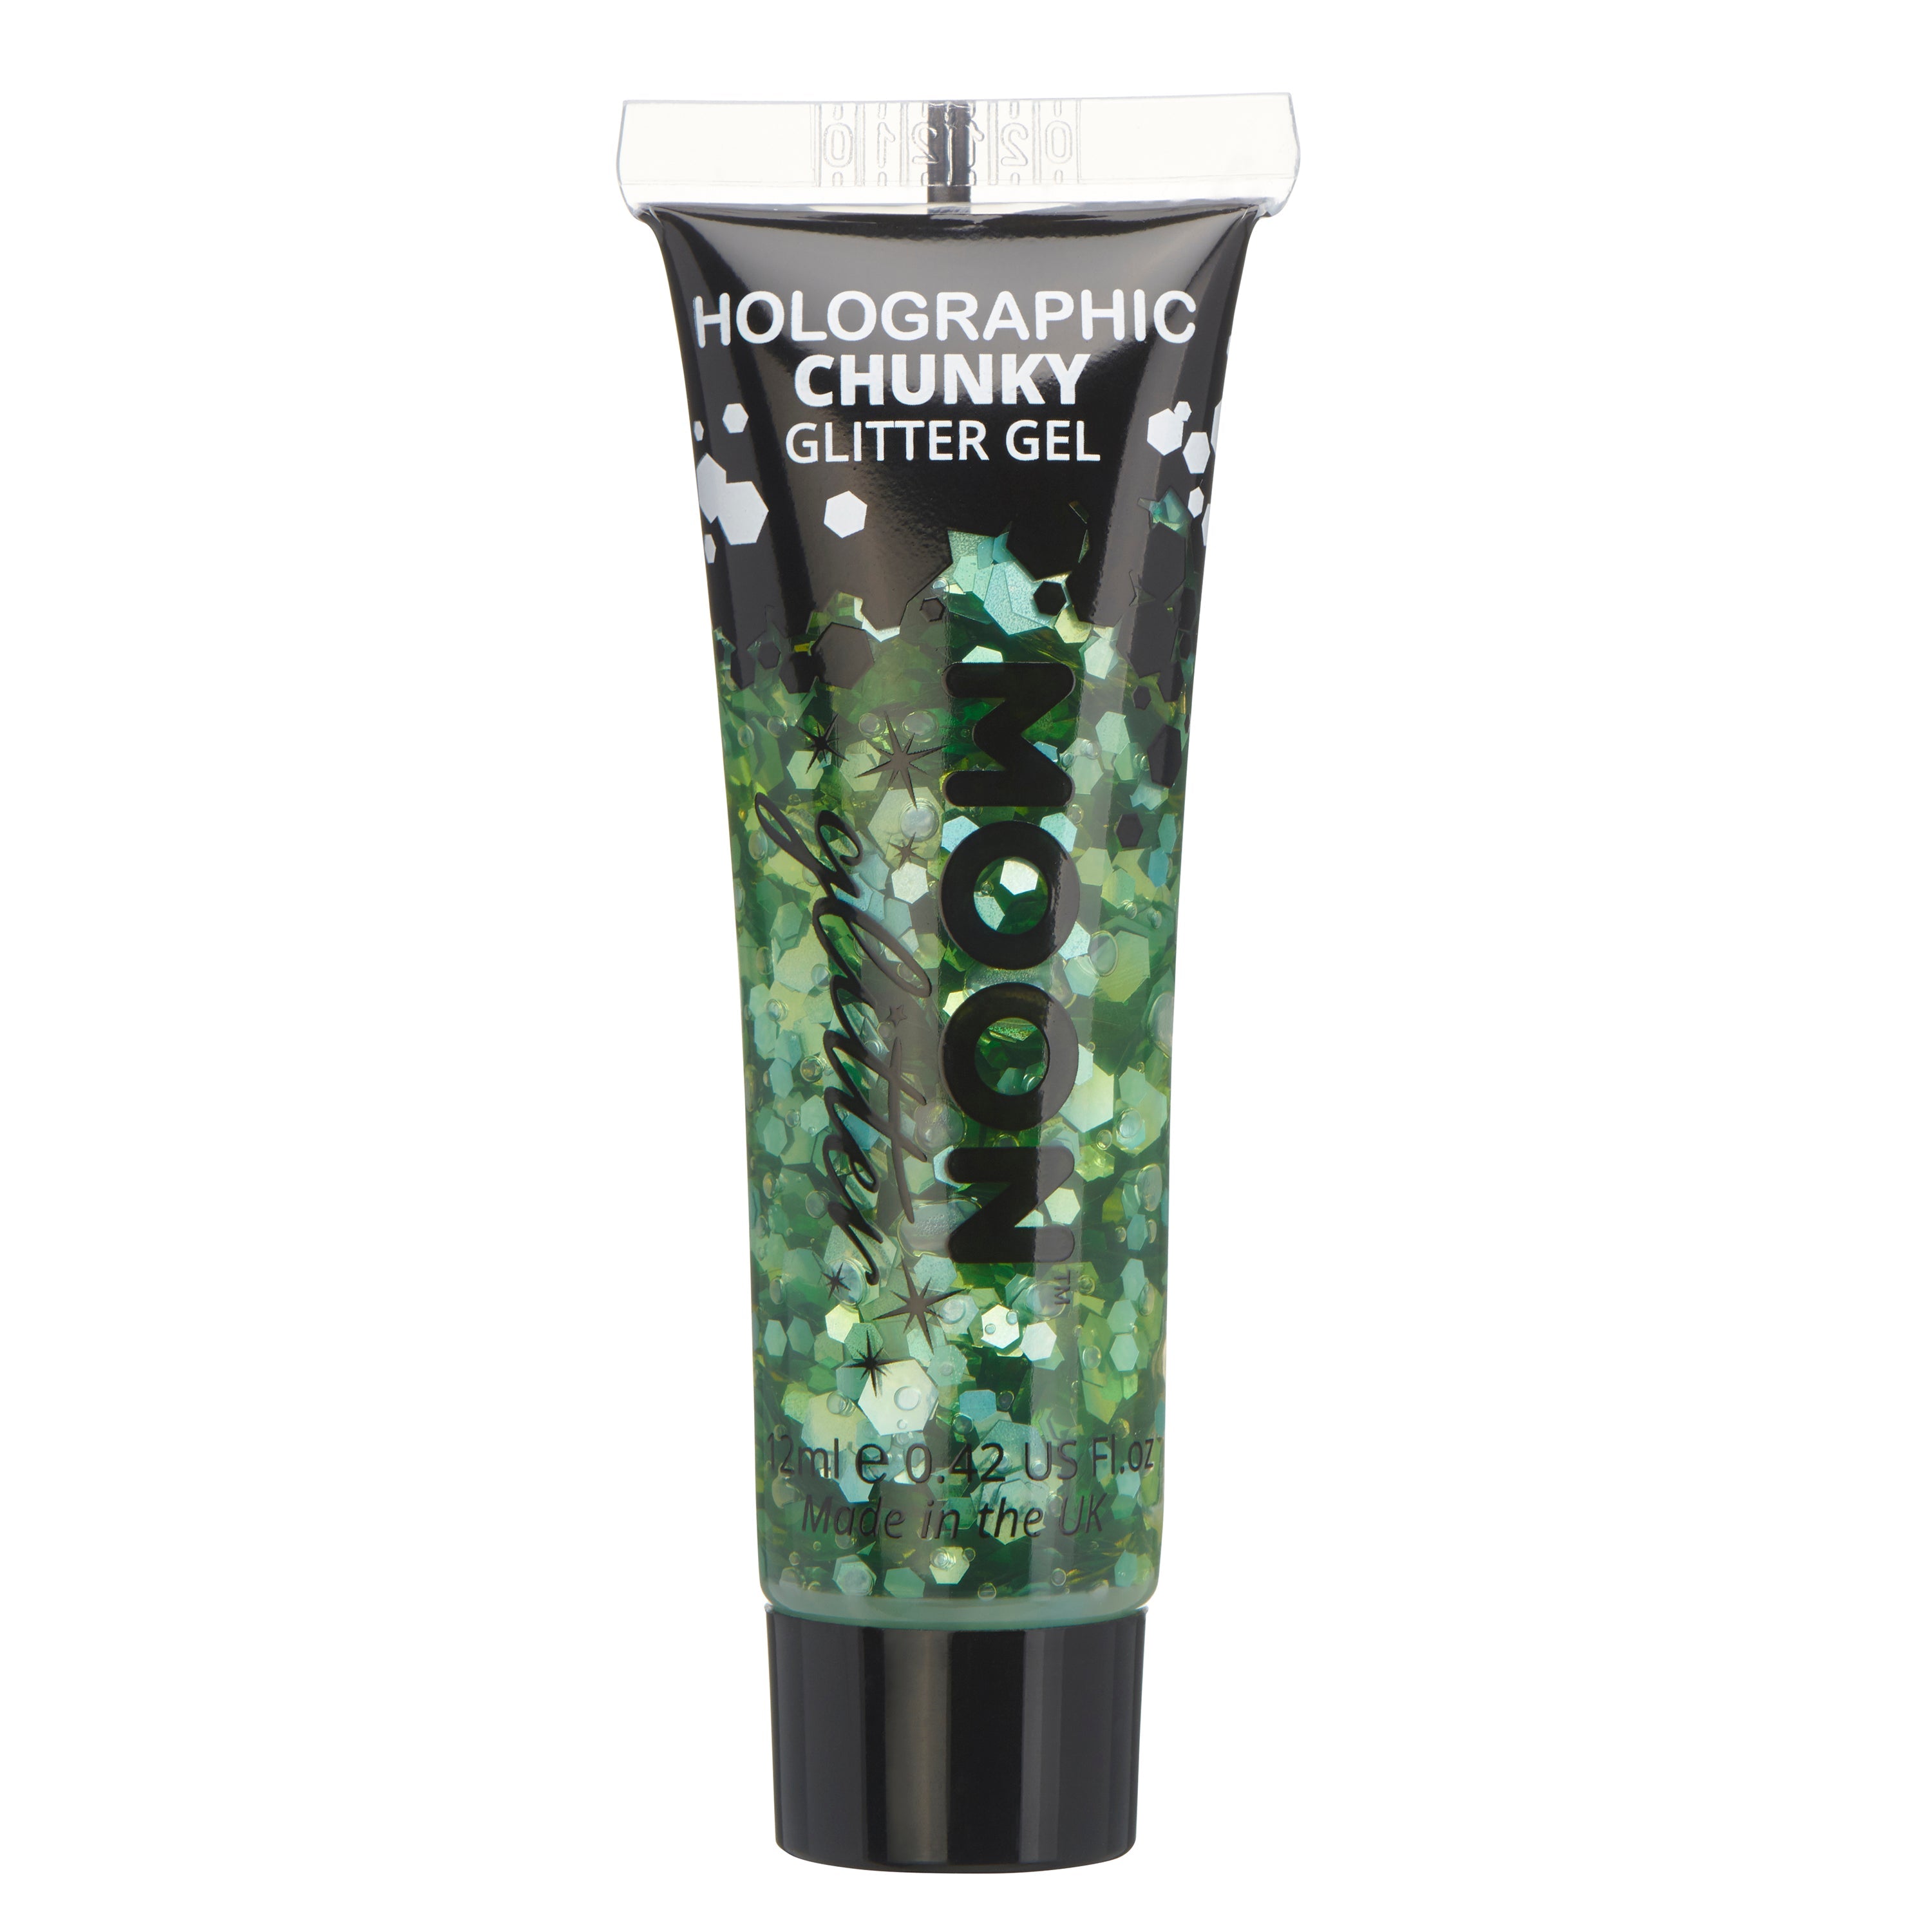 Green - Holographic Chunky Face & Body Glitter Gel, 12mL. Cosmetically certified, FDA & Health Canada compliant, cruelty free and vegan.